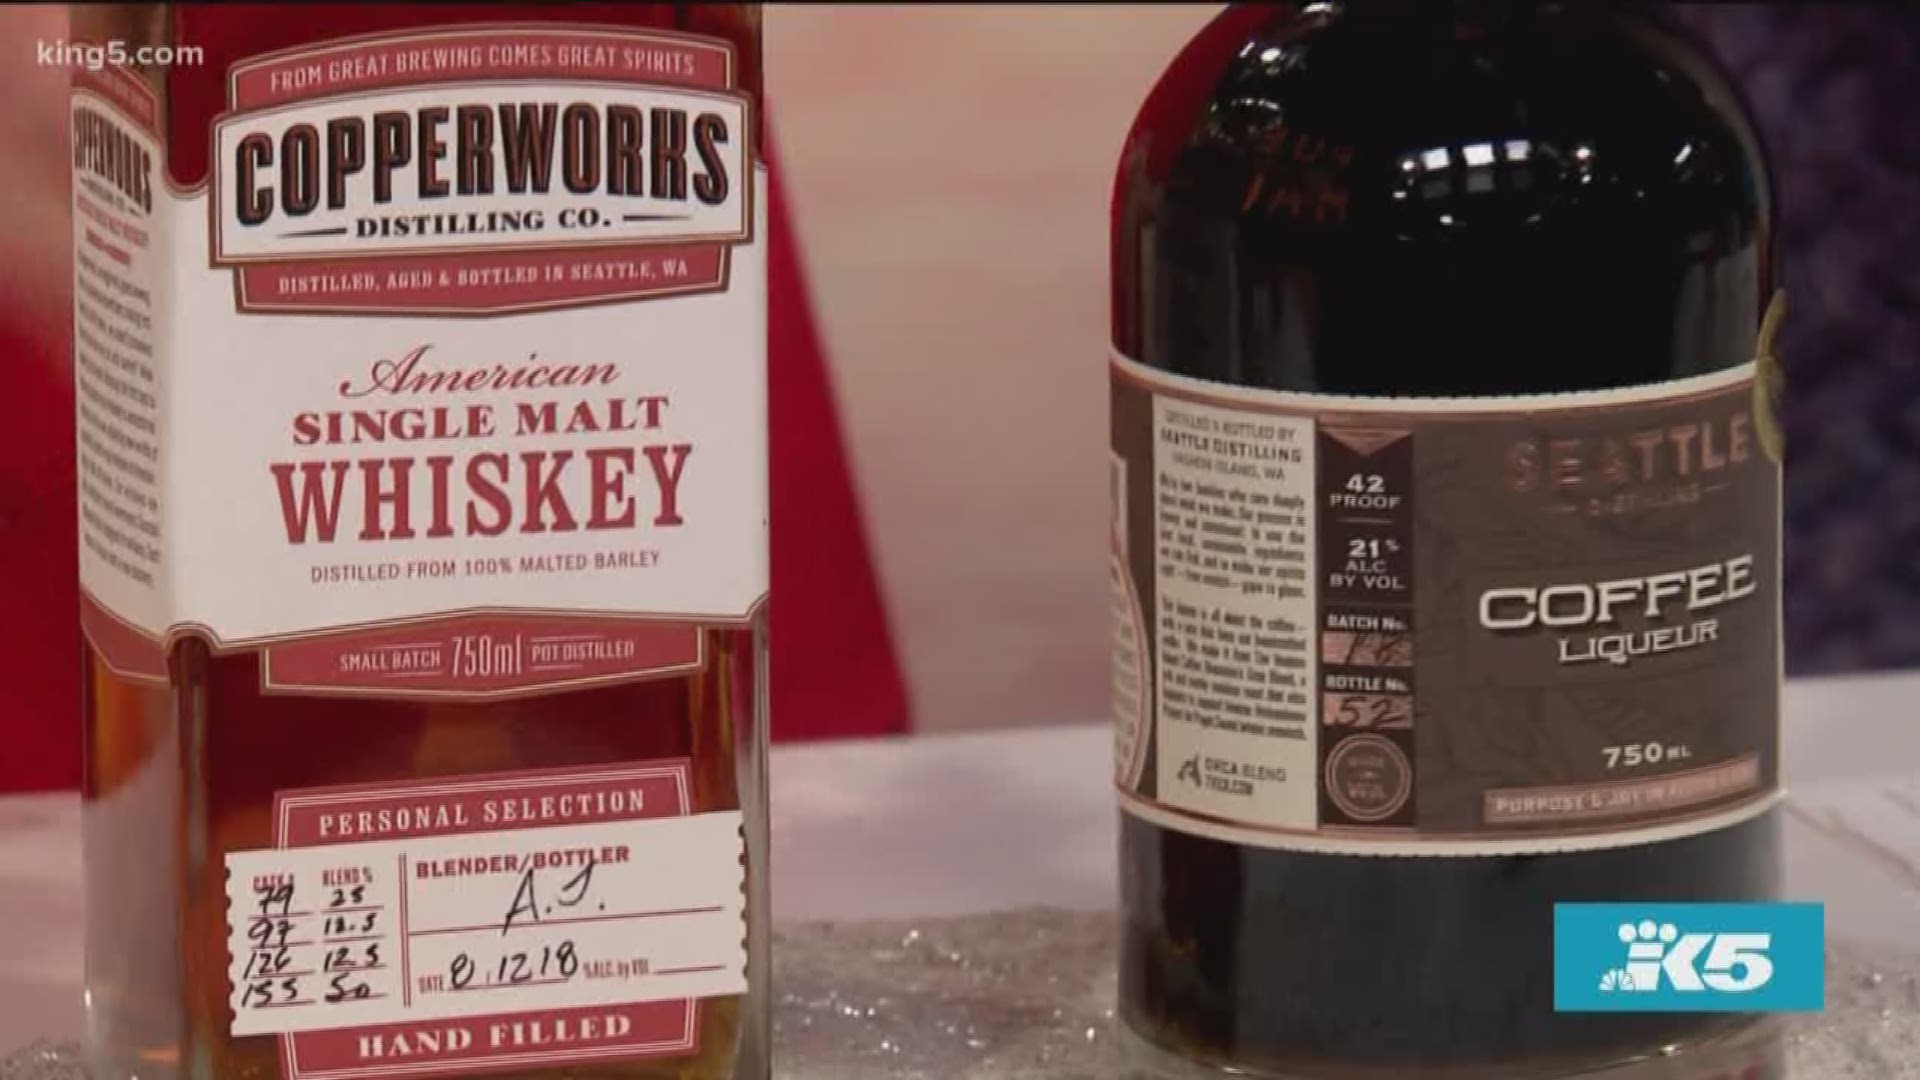 We show alcohol options for different types of drinkers. This segment is sponsored by Seattle Magazine.